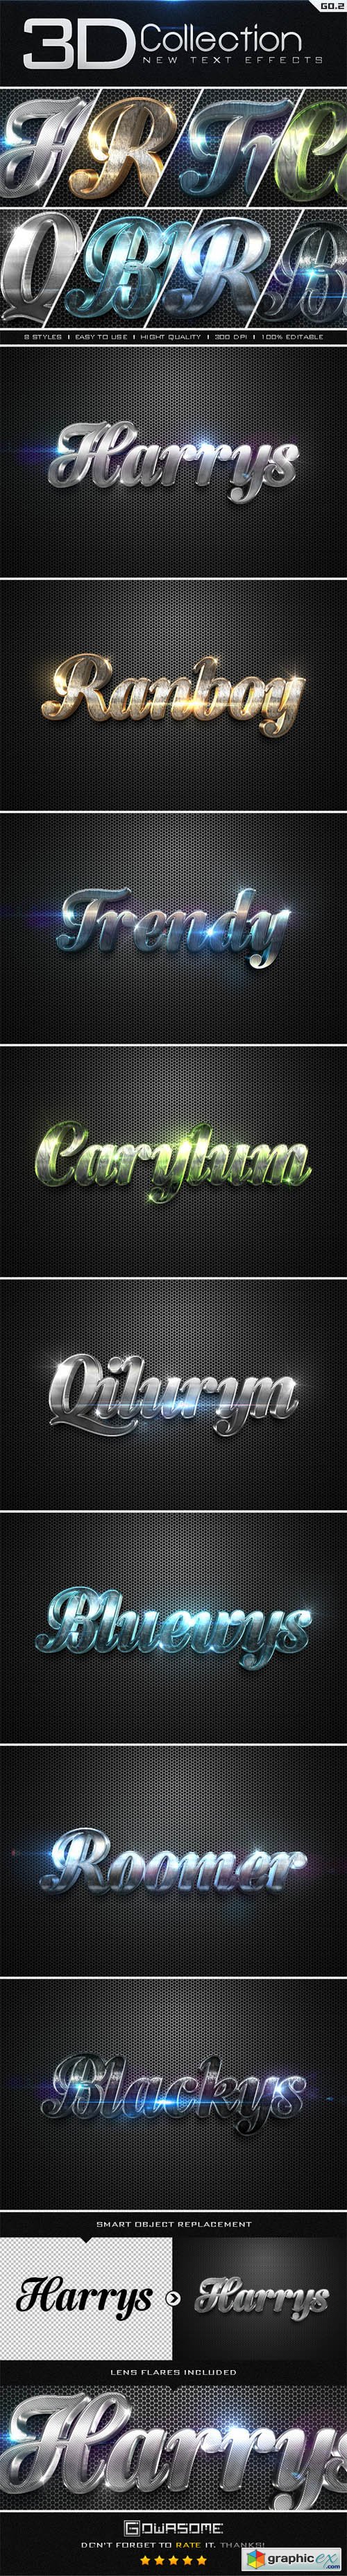 New 3D Collection Text Effects GO.2